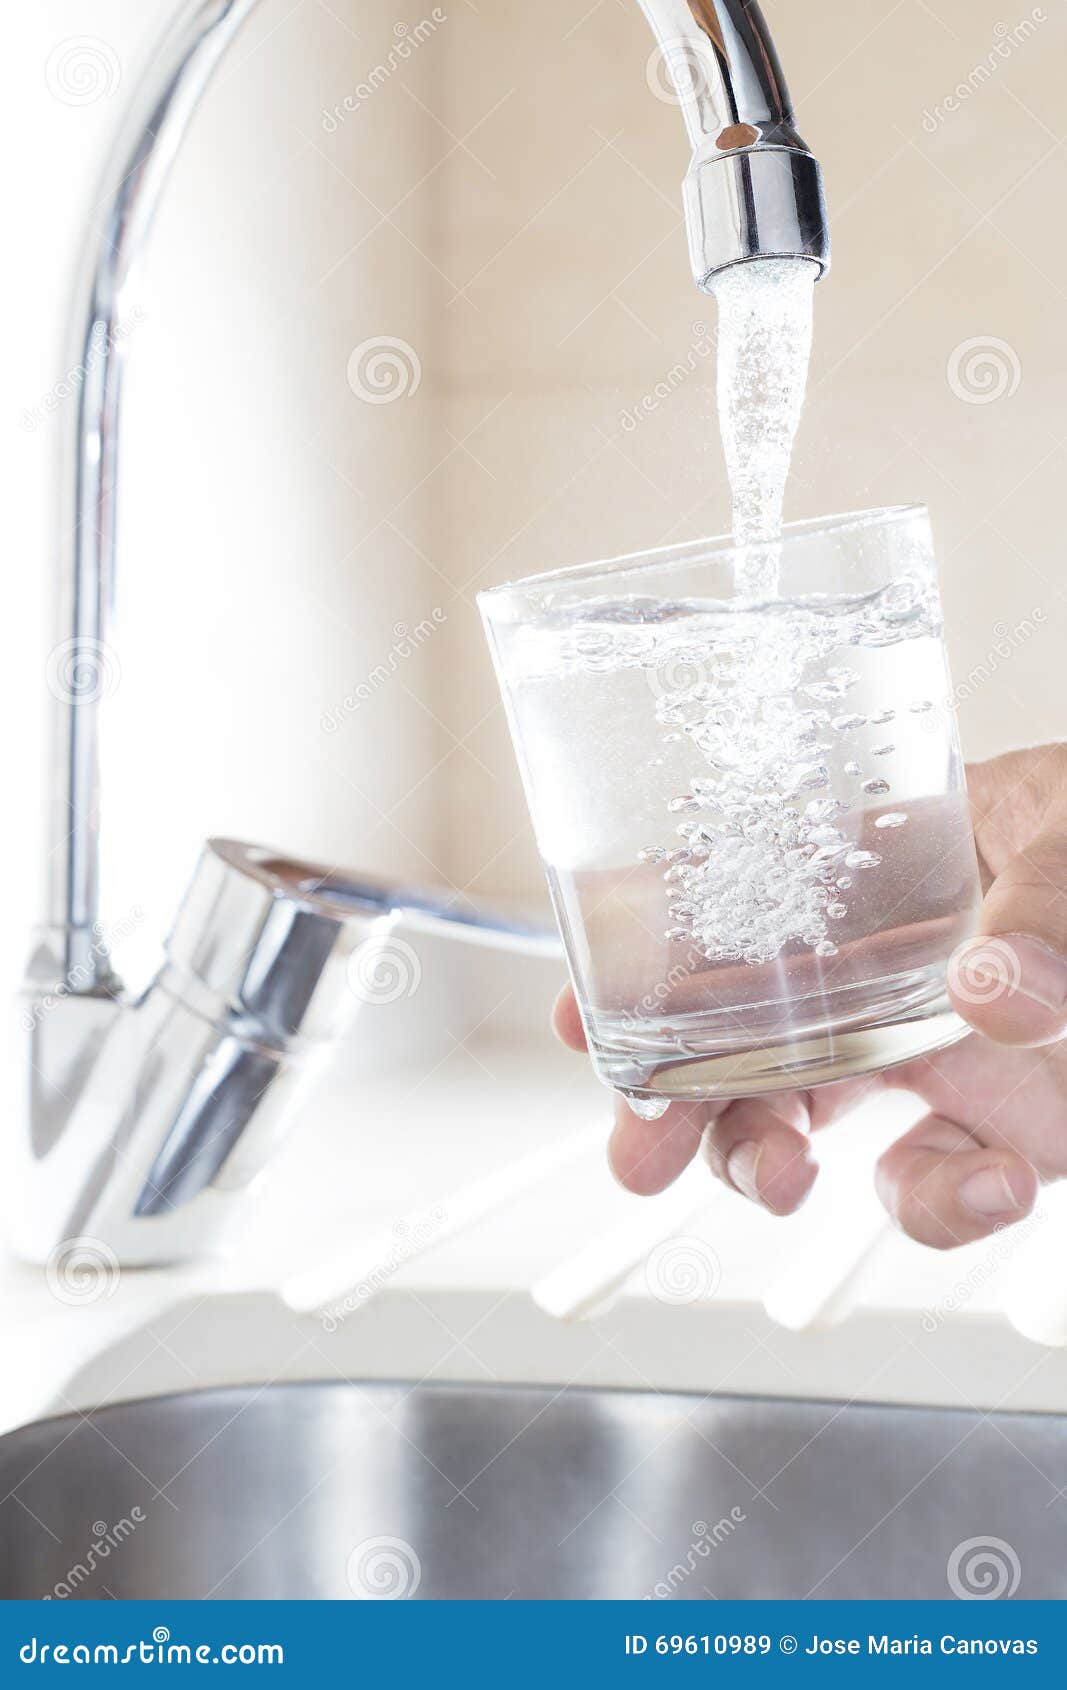 Filling Glass Of Water In Hand From Kitchen Faucet Stock Image